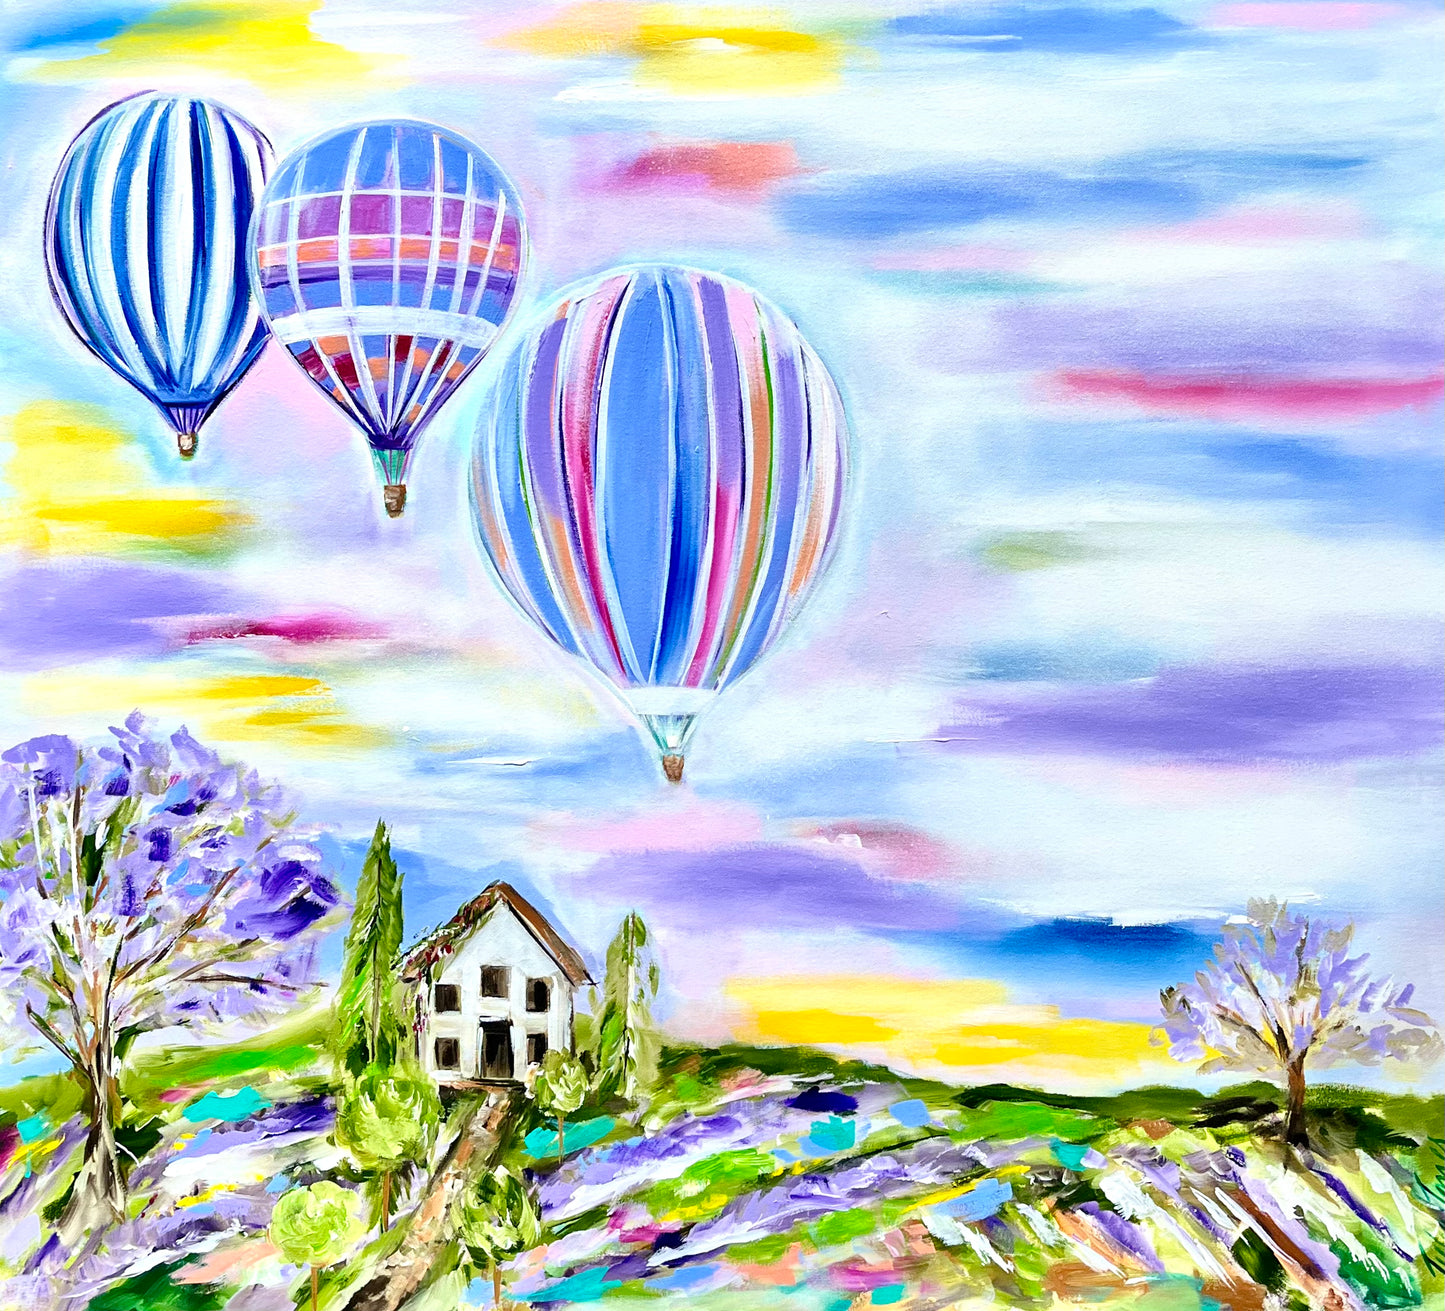 Ballooning - 1.1x1m - Original Artwork - Available by Commission